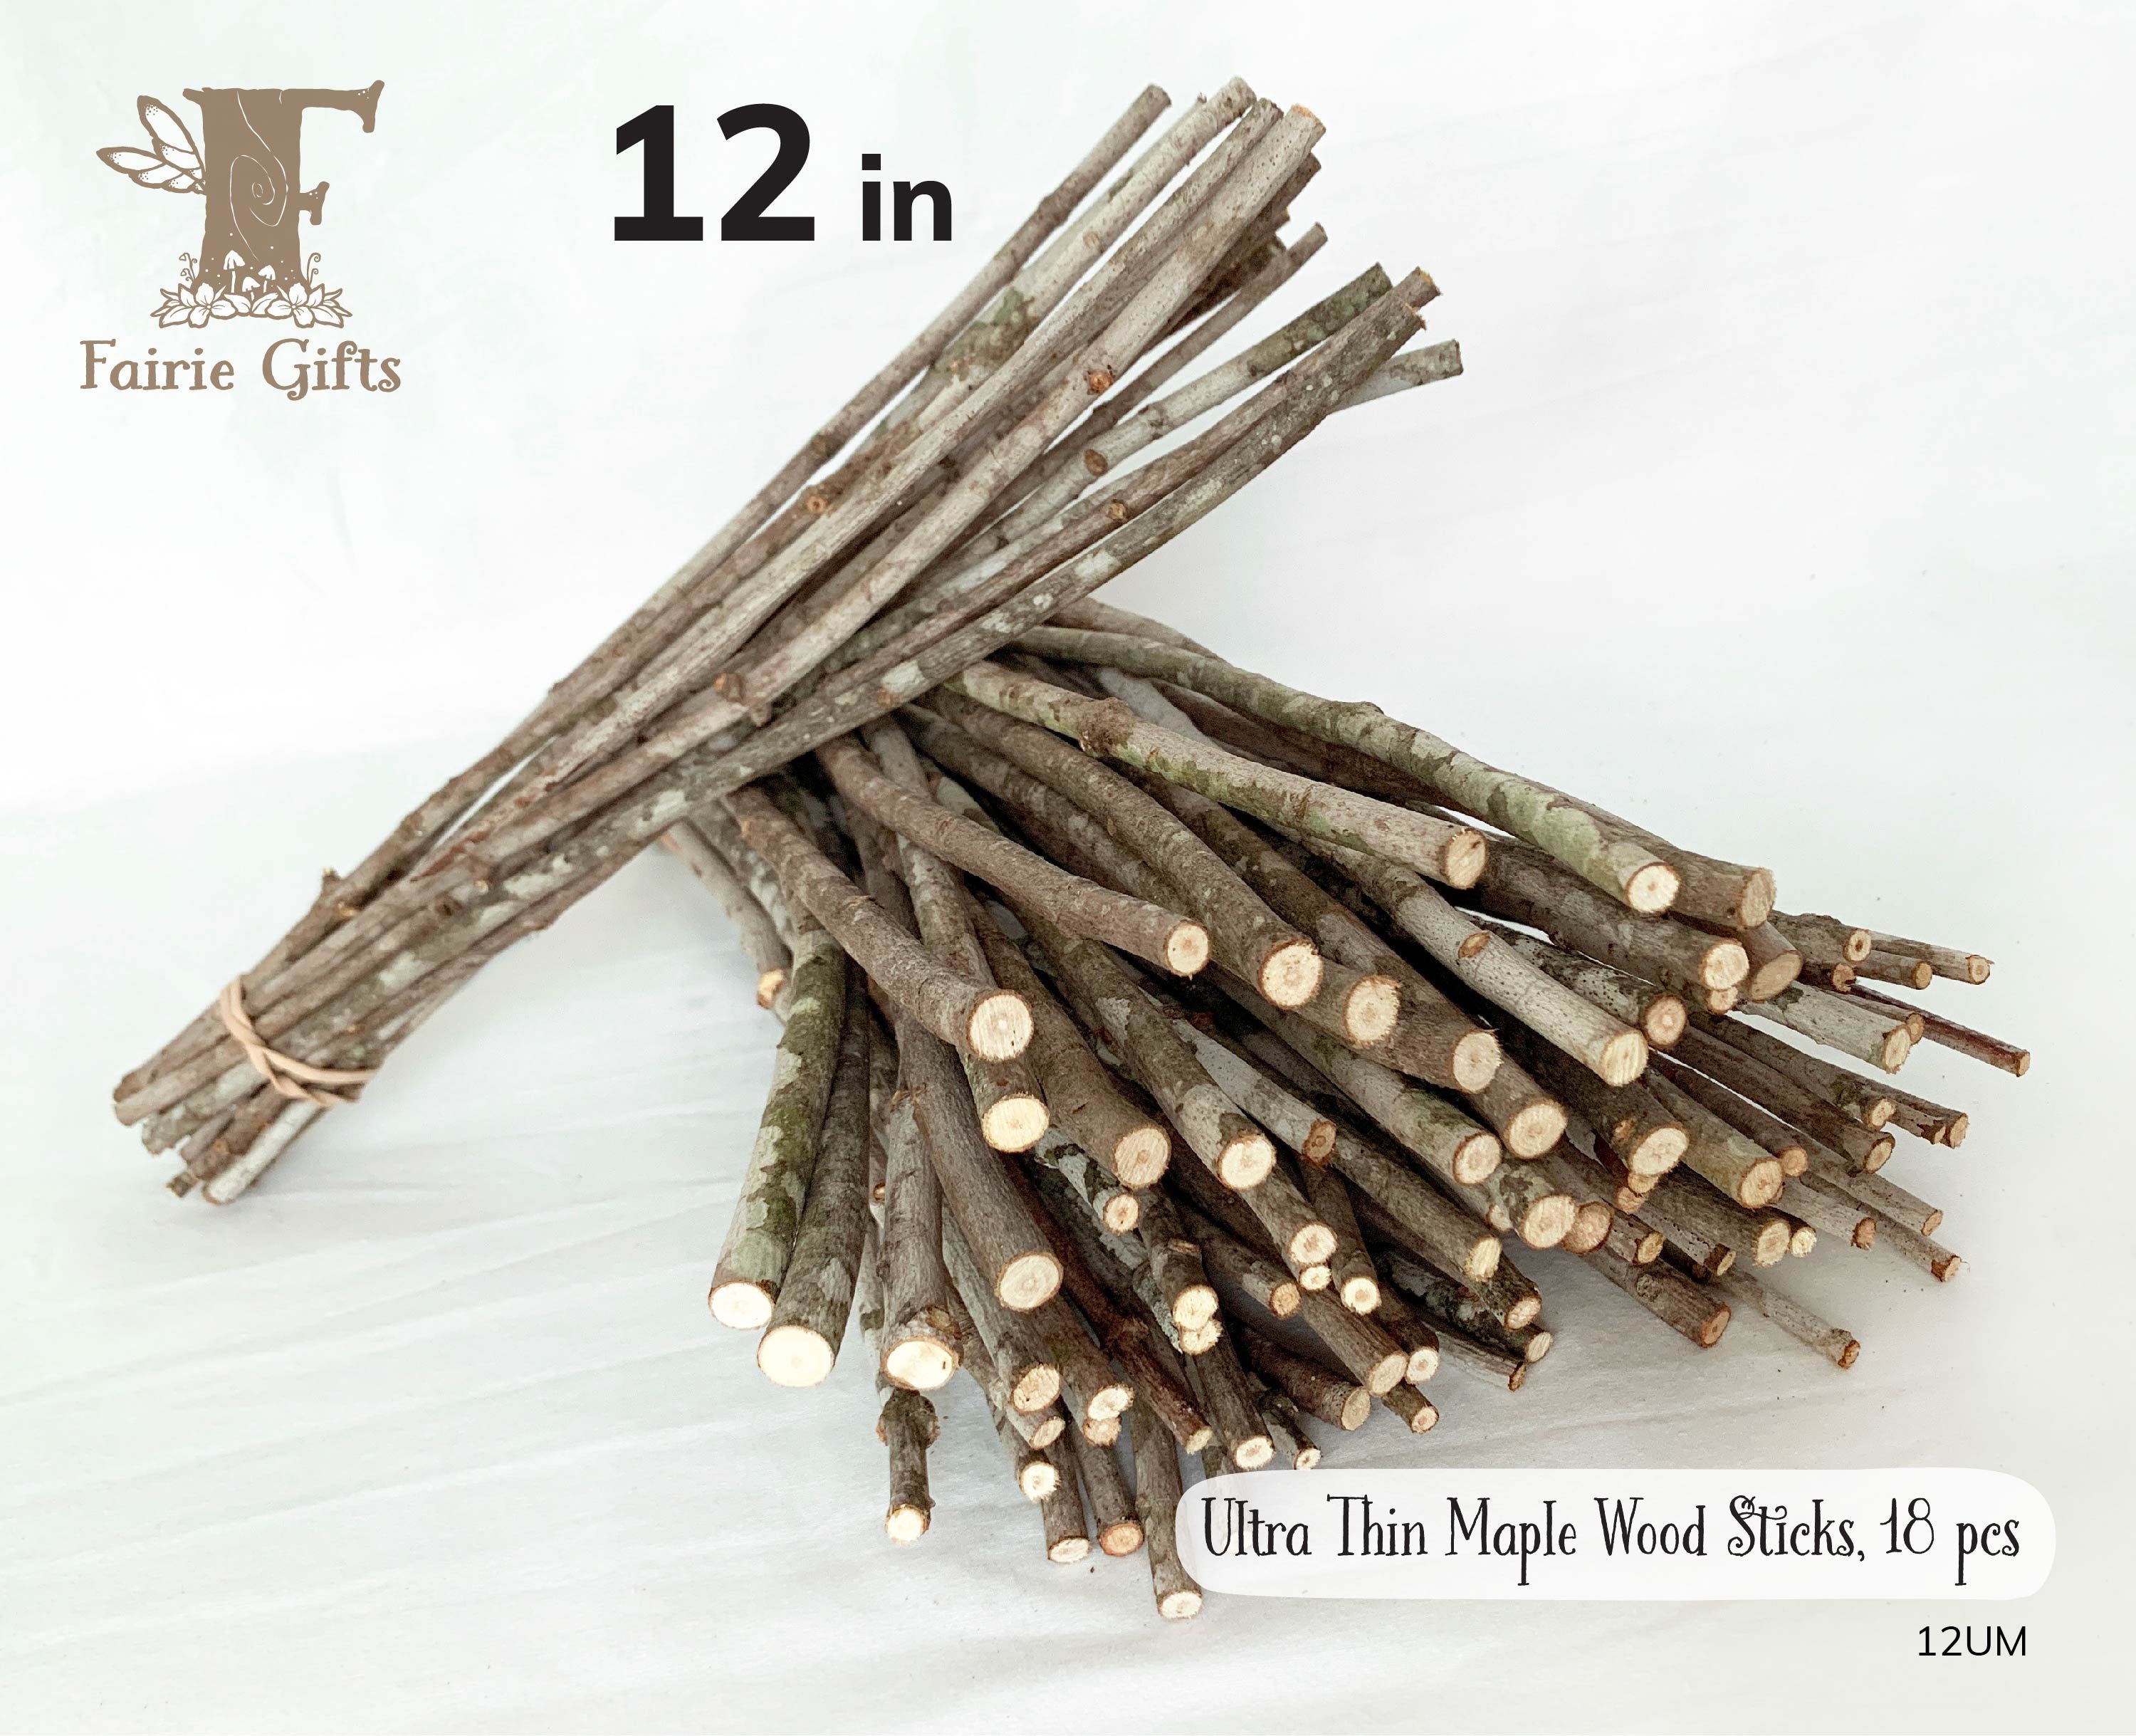 Bundle of Natural Thin Birch Twigs 10 12 Long 50 Twigs Total 